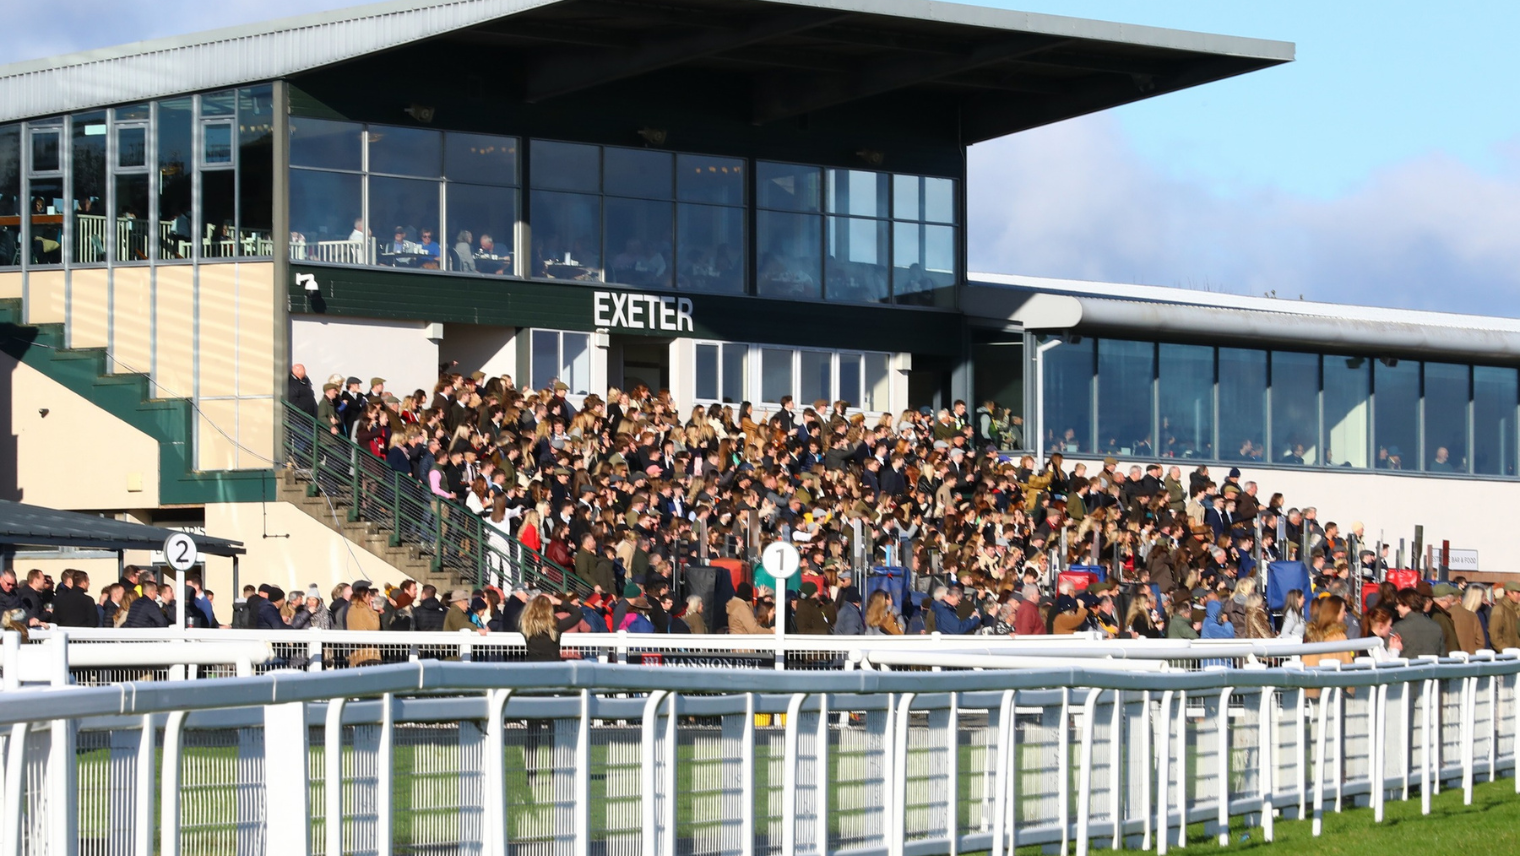 Spectators sitting in the stands at Exeter Racecourse 